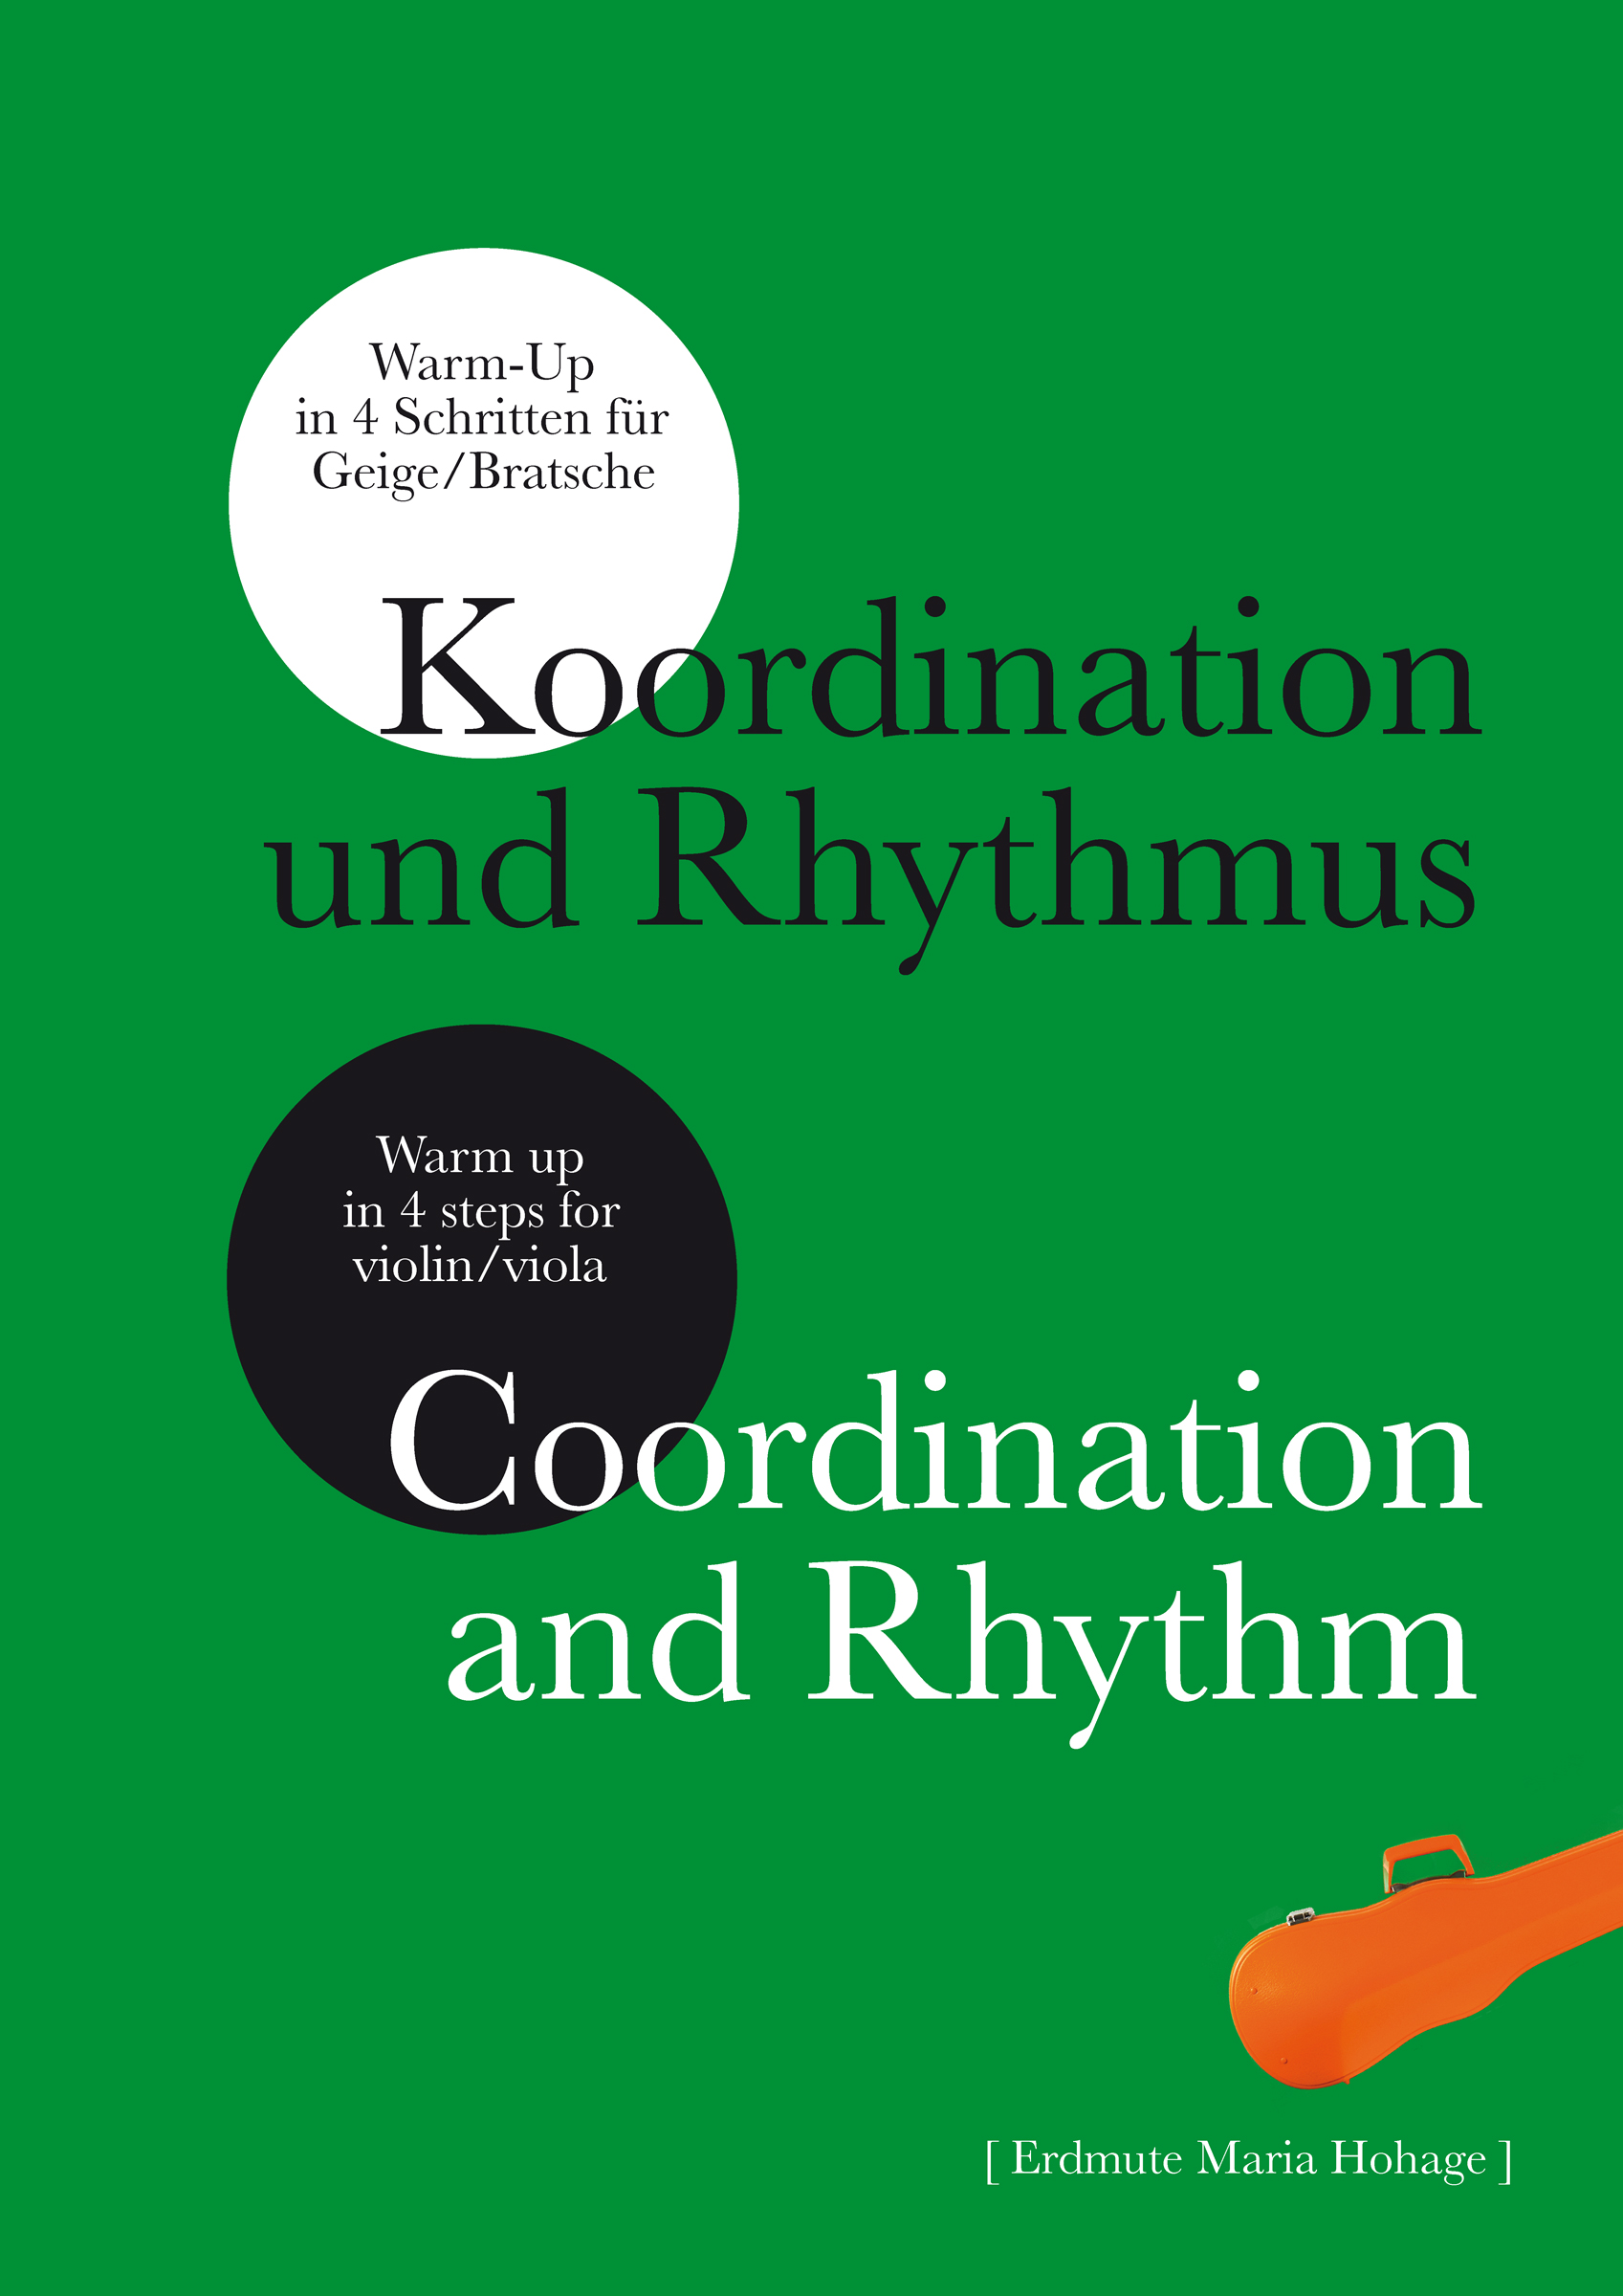 Cover of the booklet Coordination and Rhythm. Warm up for violin and viola